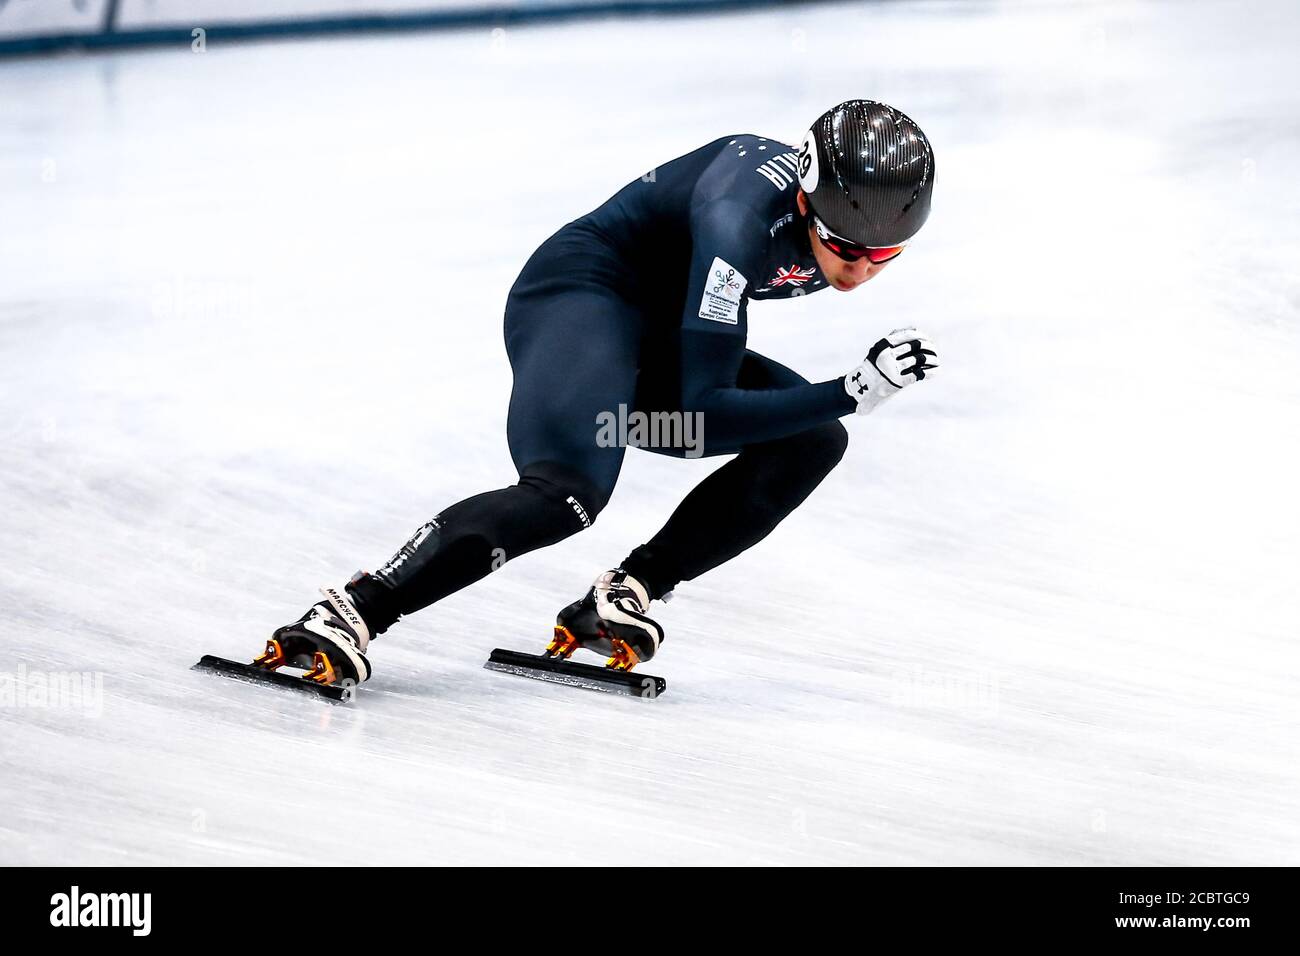 Dresden, Germany, February 03, 2019: Hyun Woo Jung compete during the ISU Short Track Speed Skating World Championship at the EnergieVerbund Arena Stock Photo